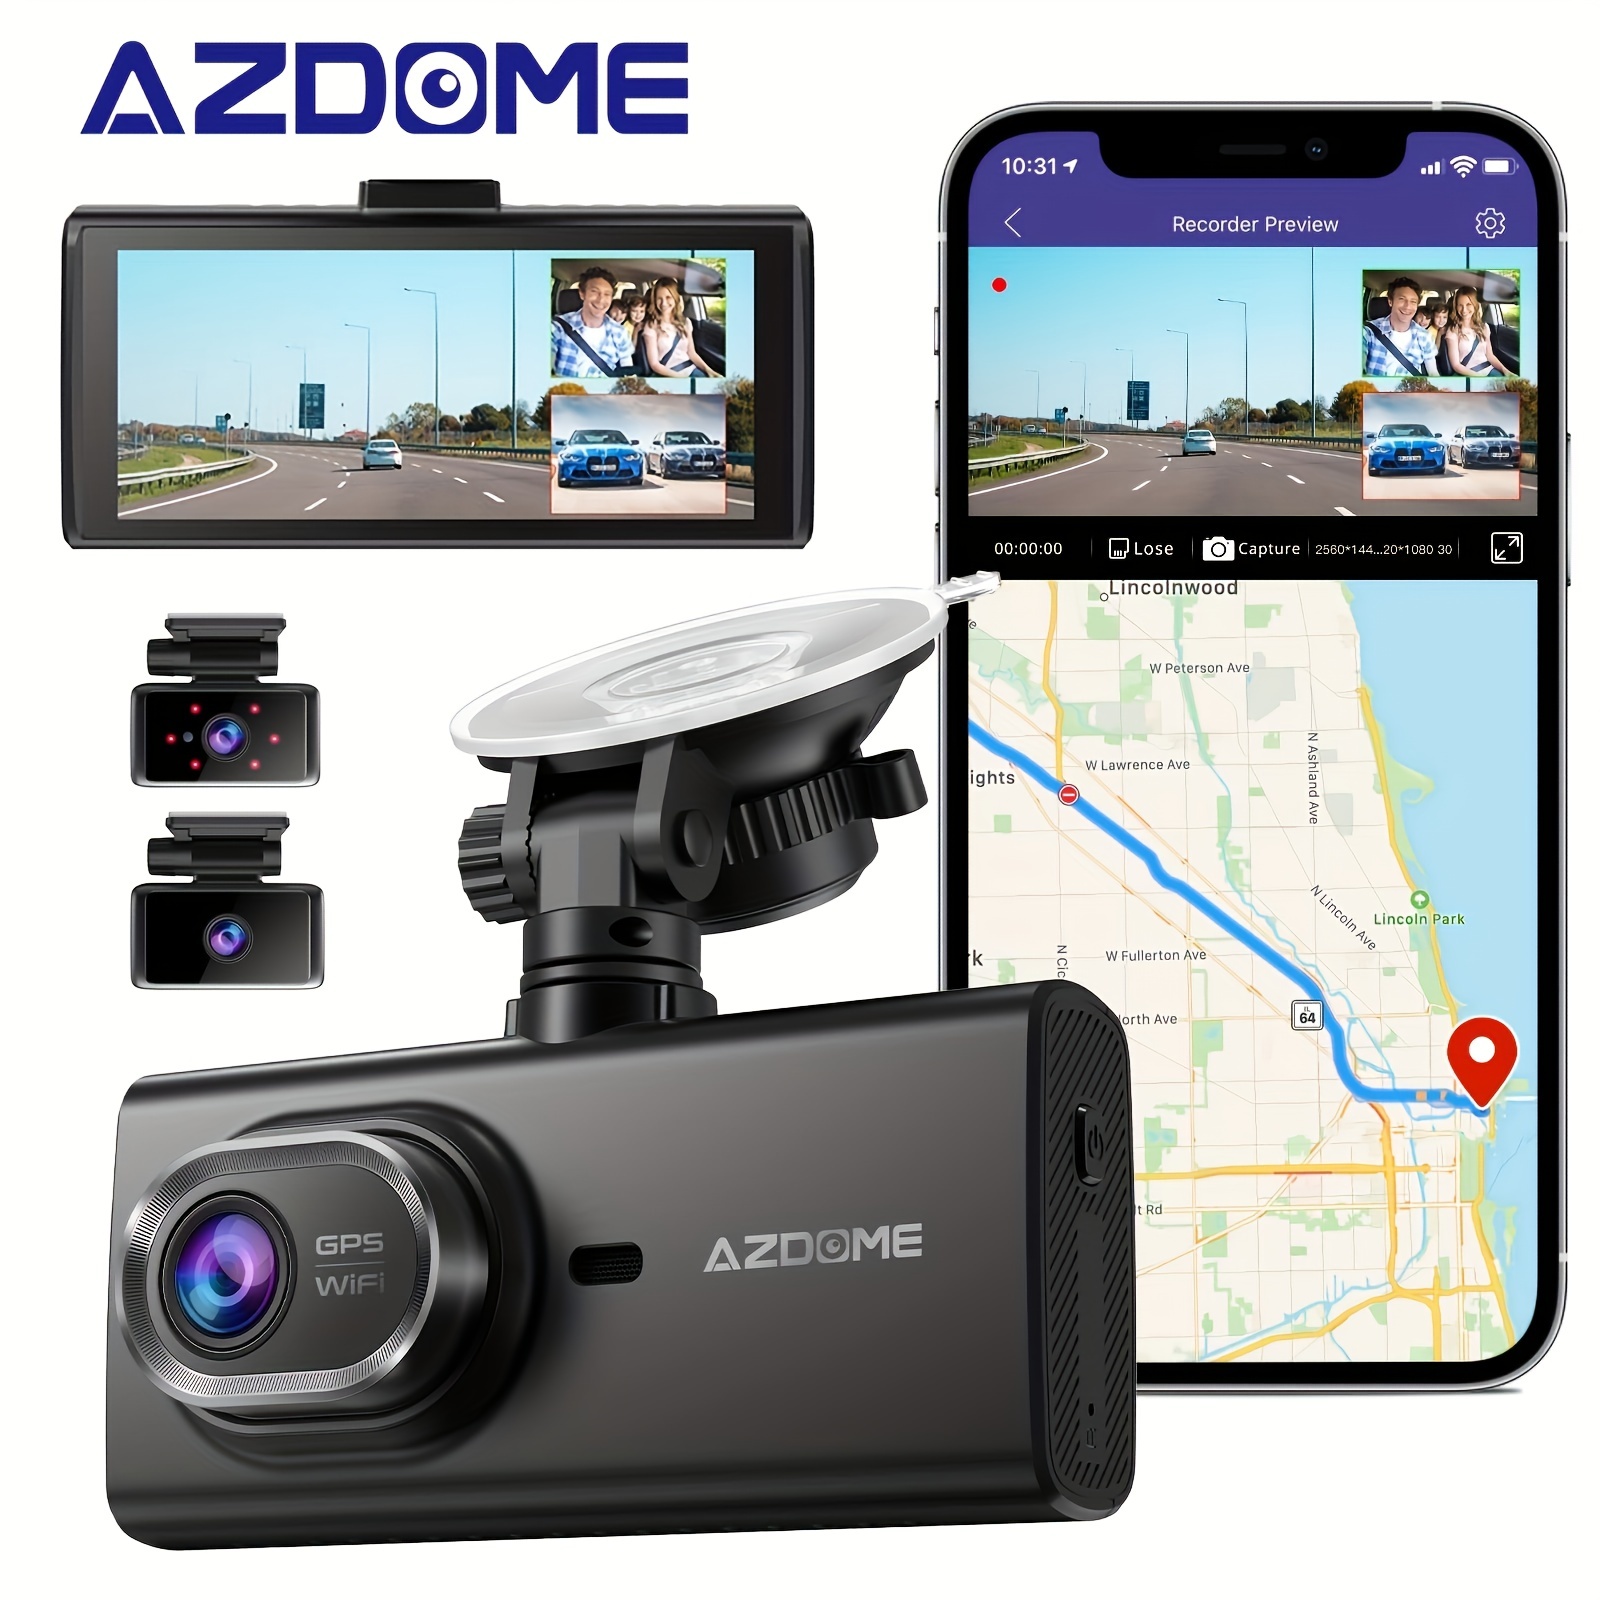 AZDOME PG17 Mirror Dash Cam Front and Rear Dual Dash Camera for Cars 11.8  Full Touch Screen 2K Night Vision Backup Camera - AliExpress